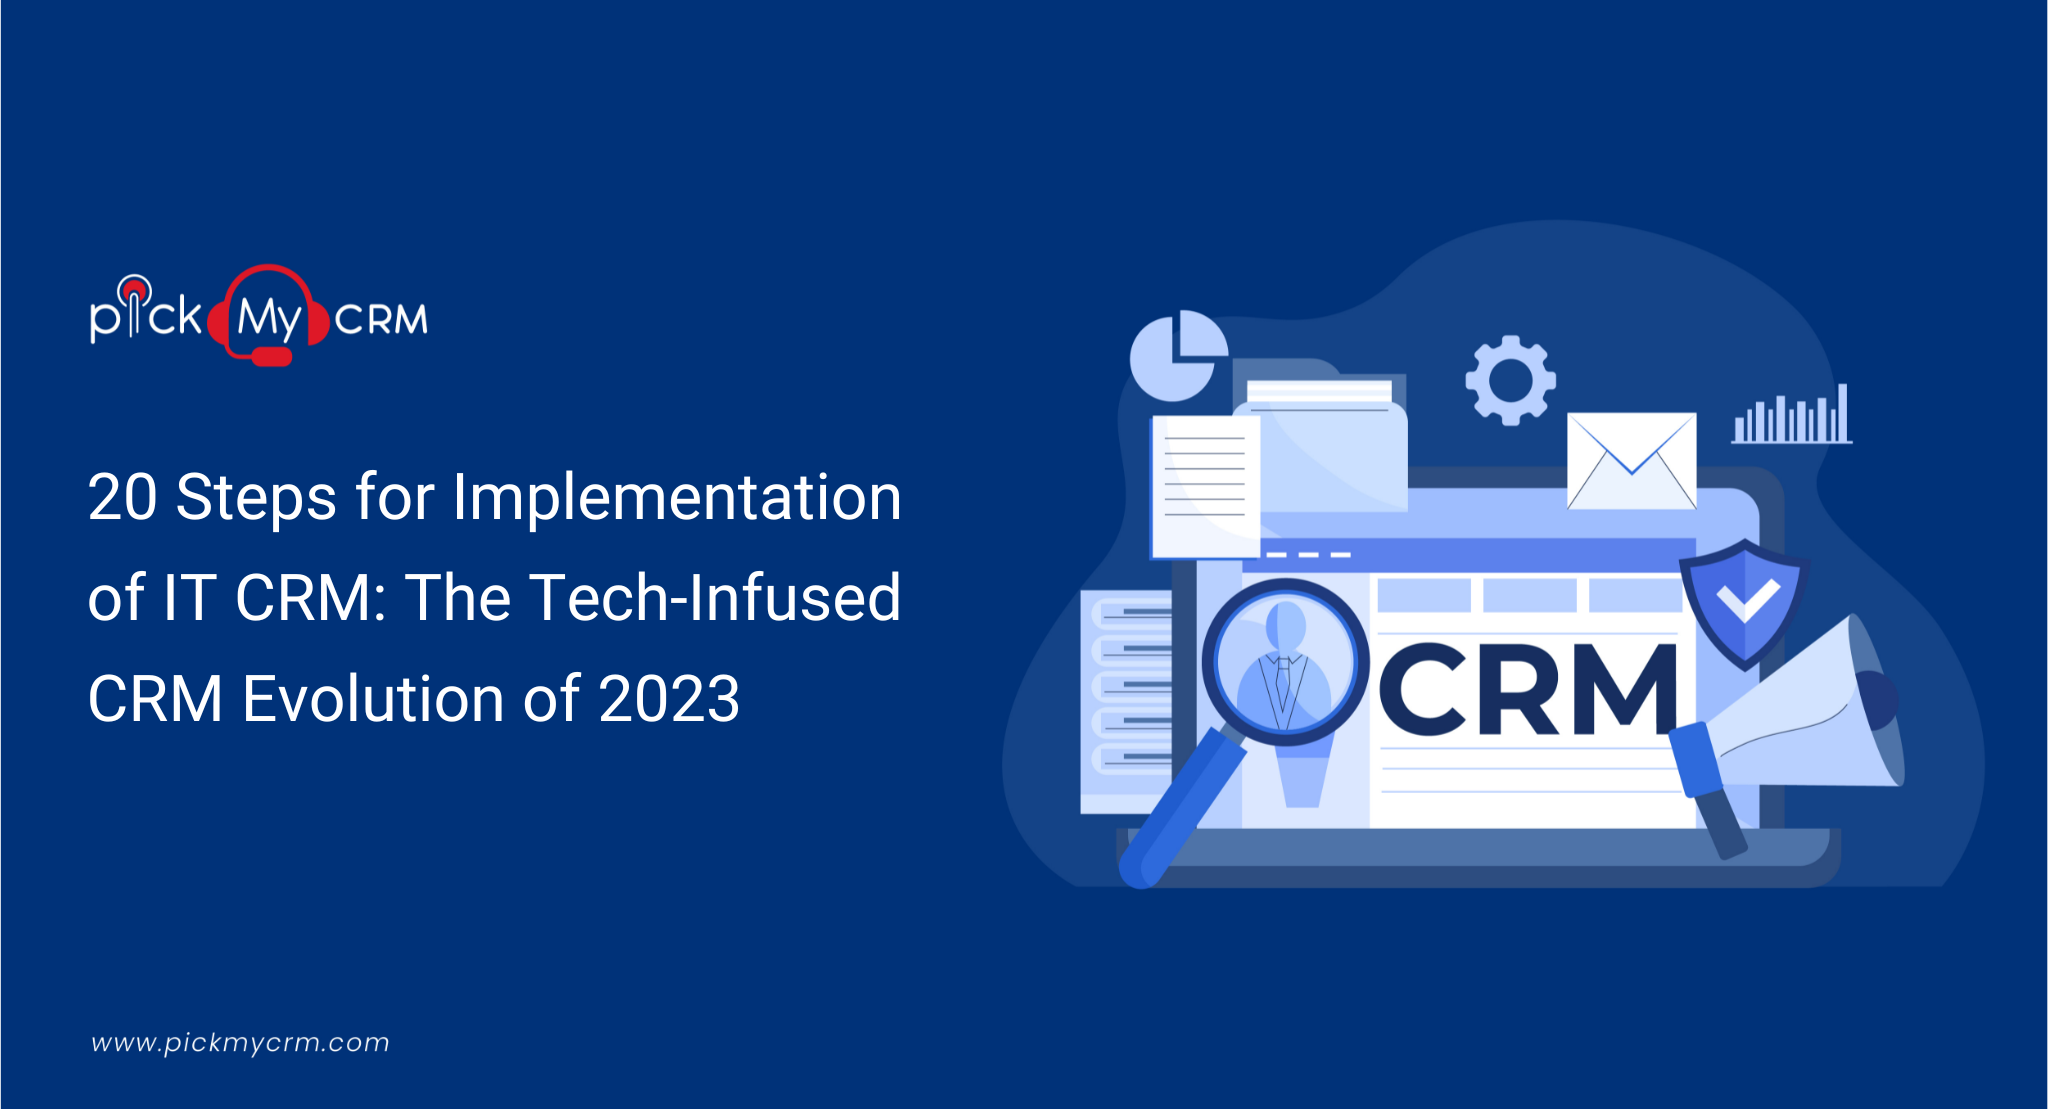 20 Steps for Implementation of IT CRM: The Tech-Infused CRM Evolution of 2023